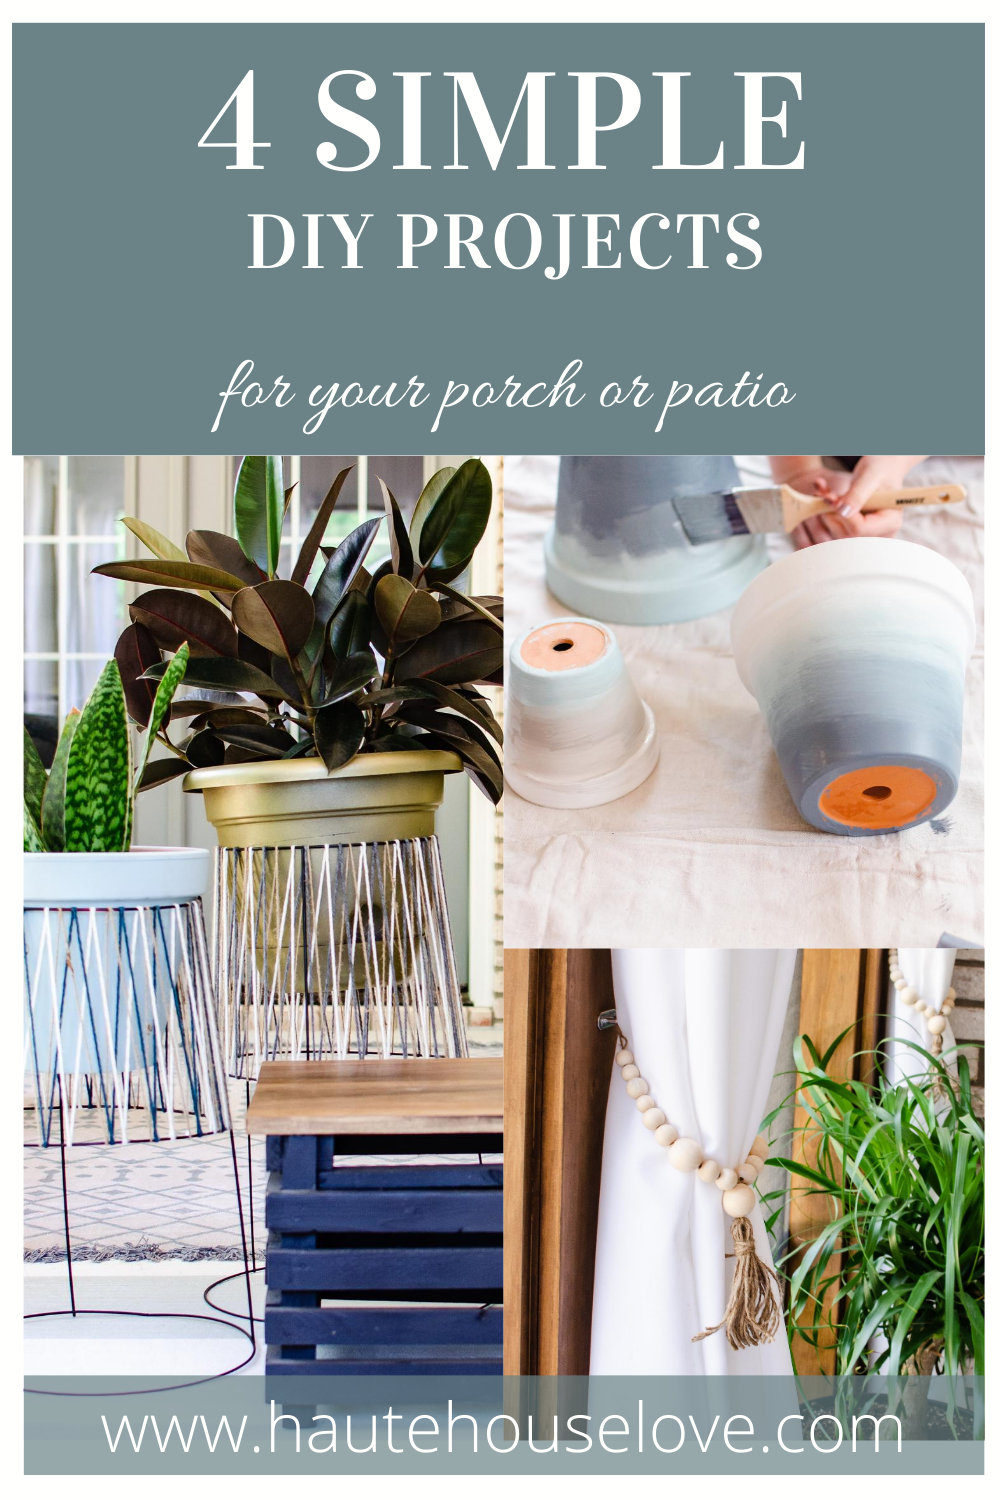 4 Simple (One Hour) DIY Projects for your Porch or Patio